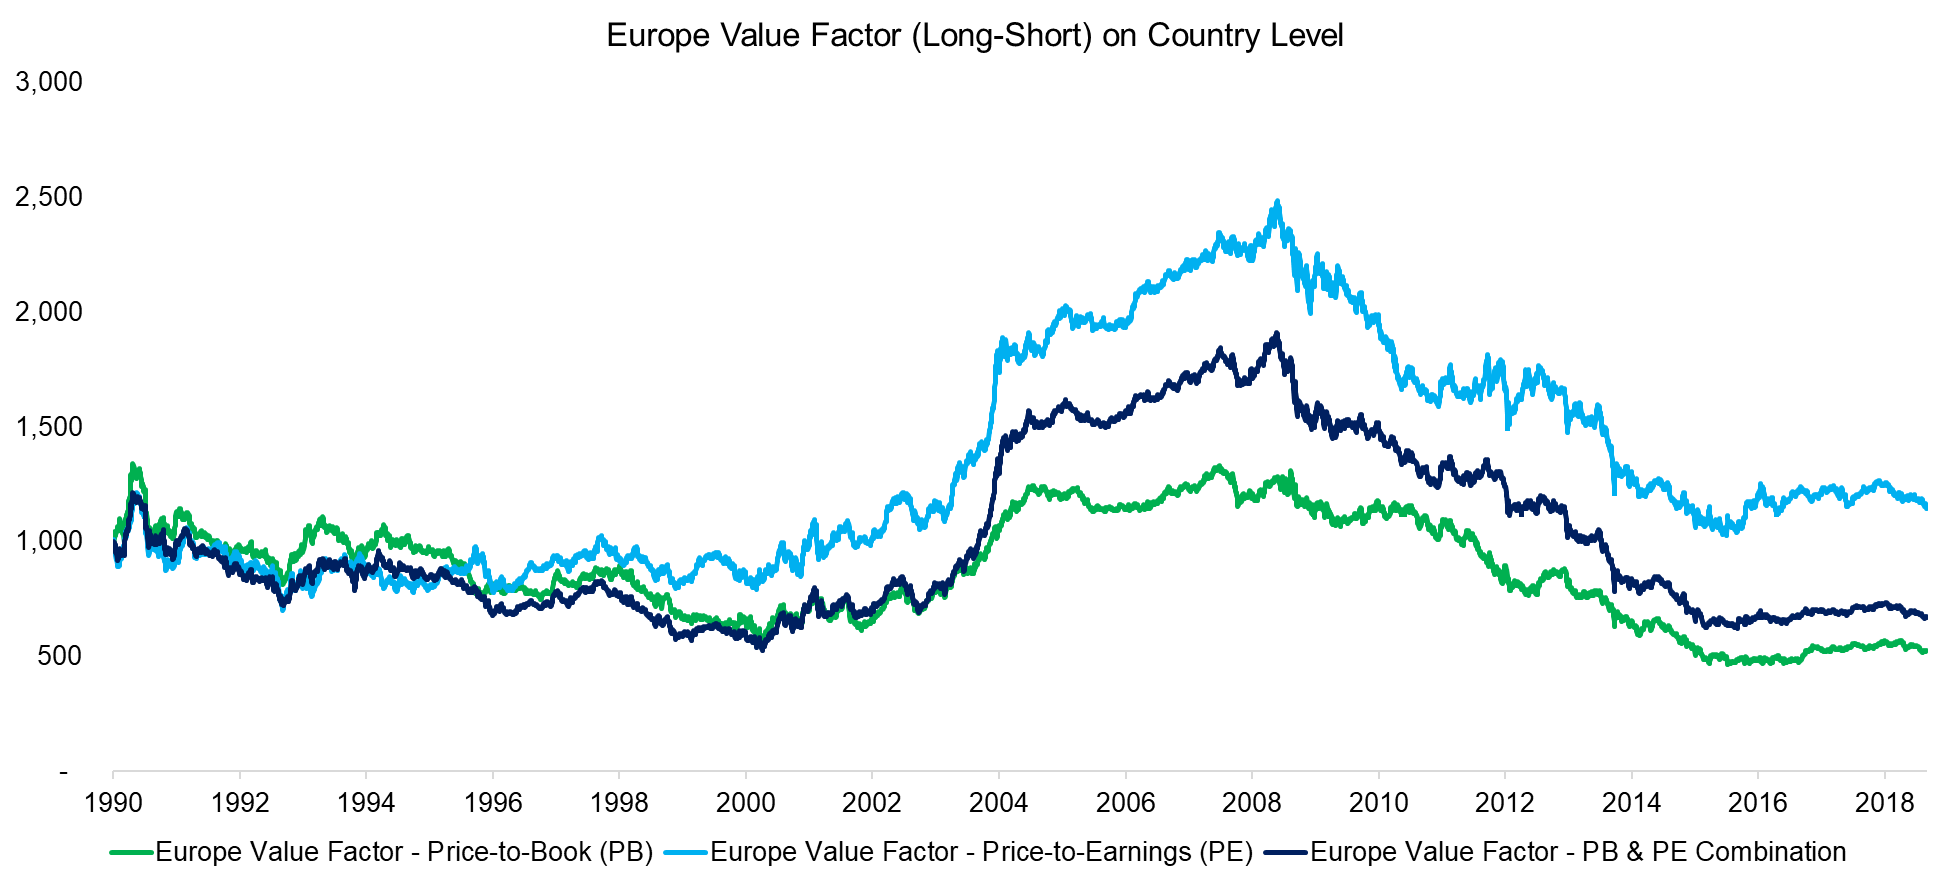 Europe Value Factor (Long-Short) on Country Level